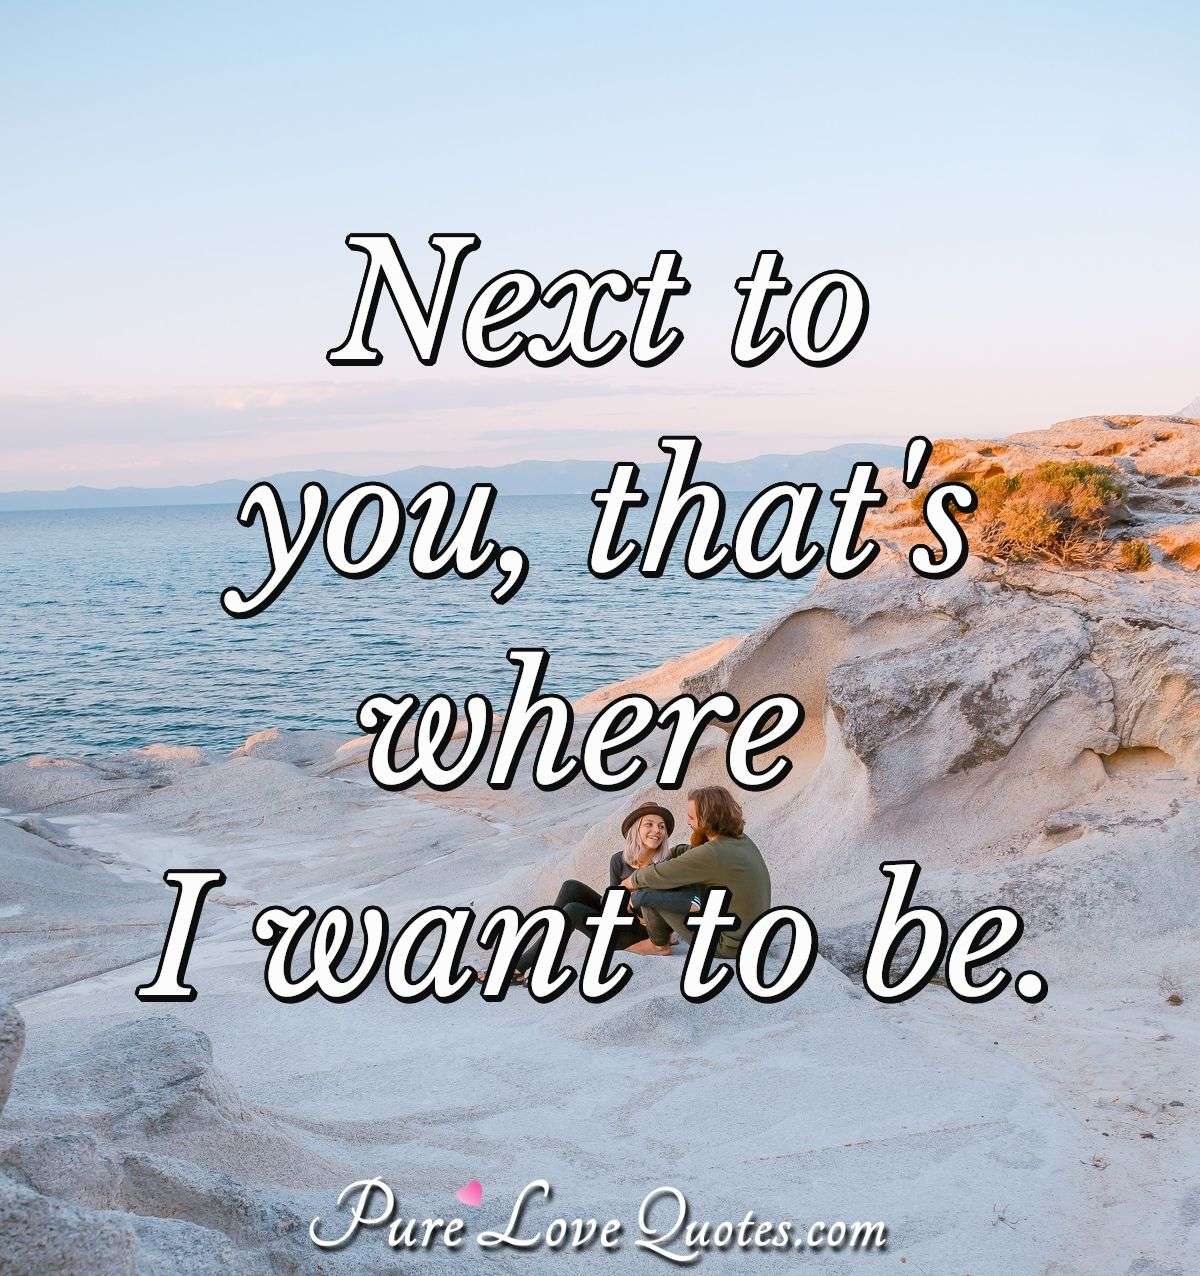 Next to you, that's where I want to be. - Anonymous